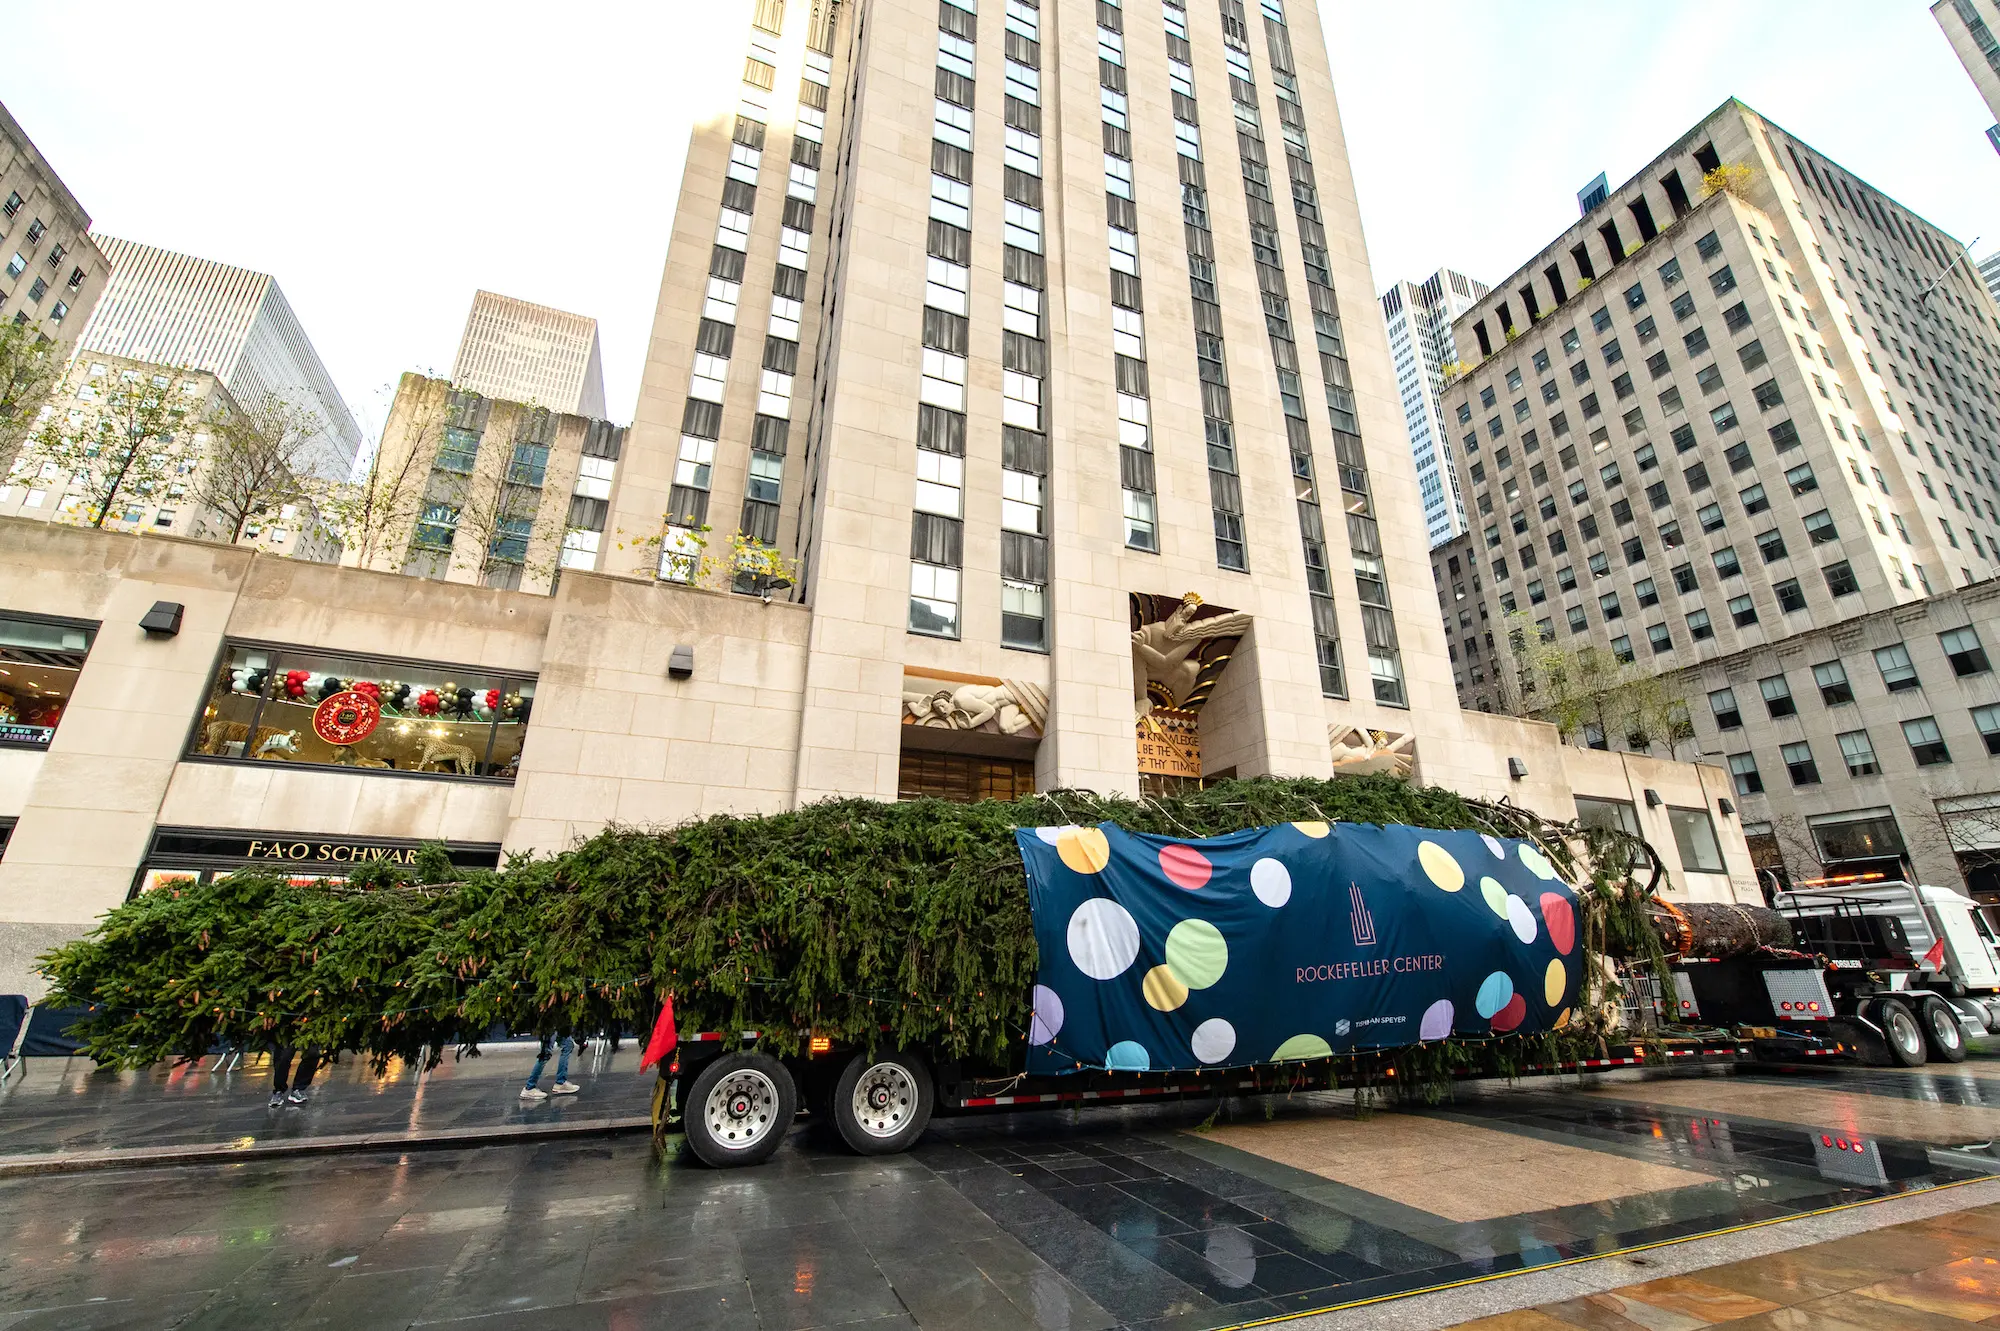 Everything You Need To Know About The 2022 Rockefeller Christmas Tree